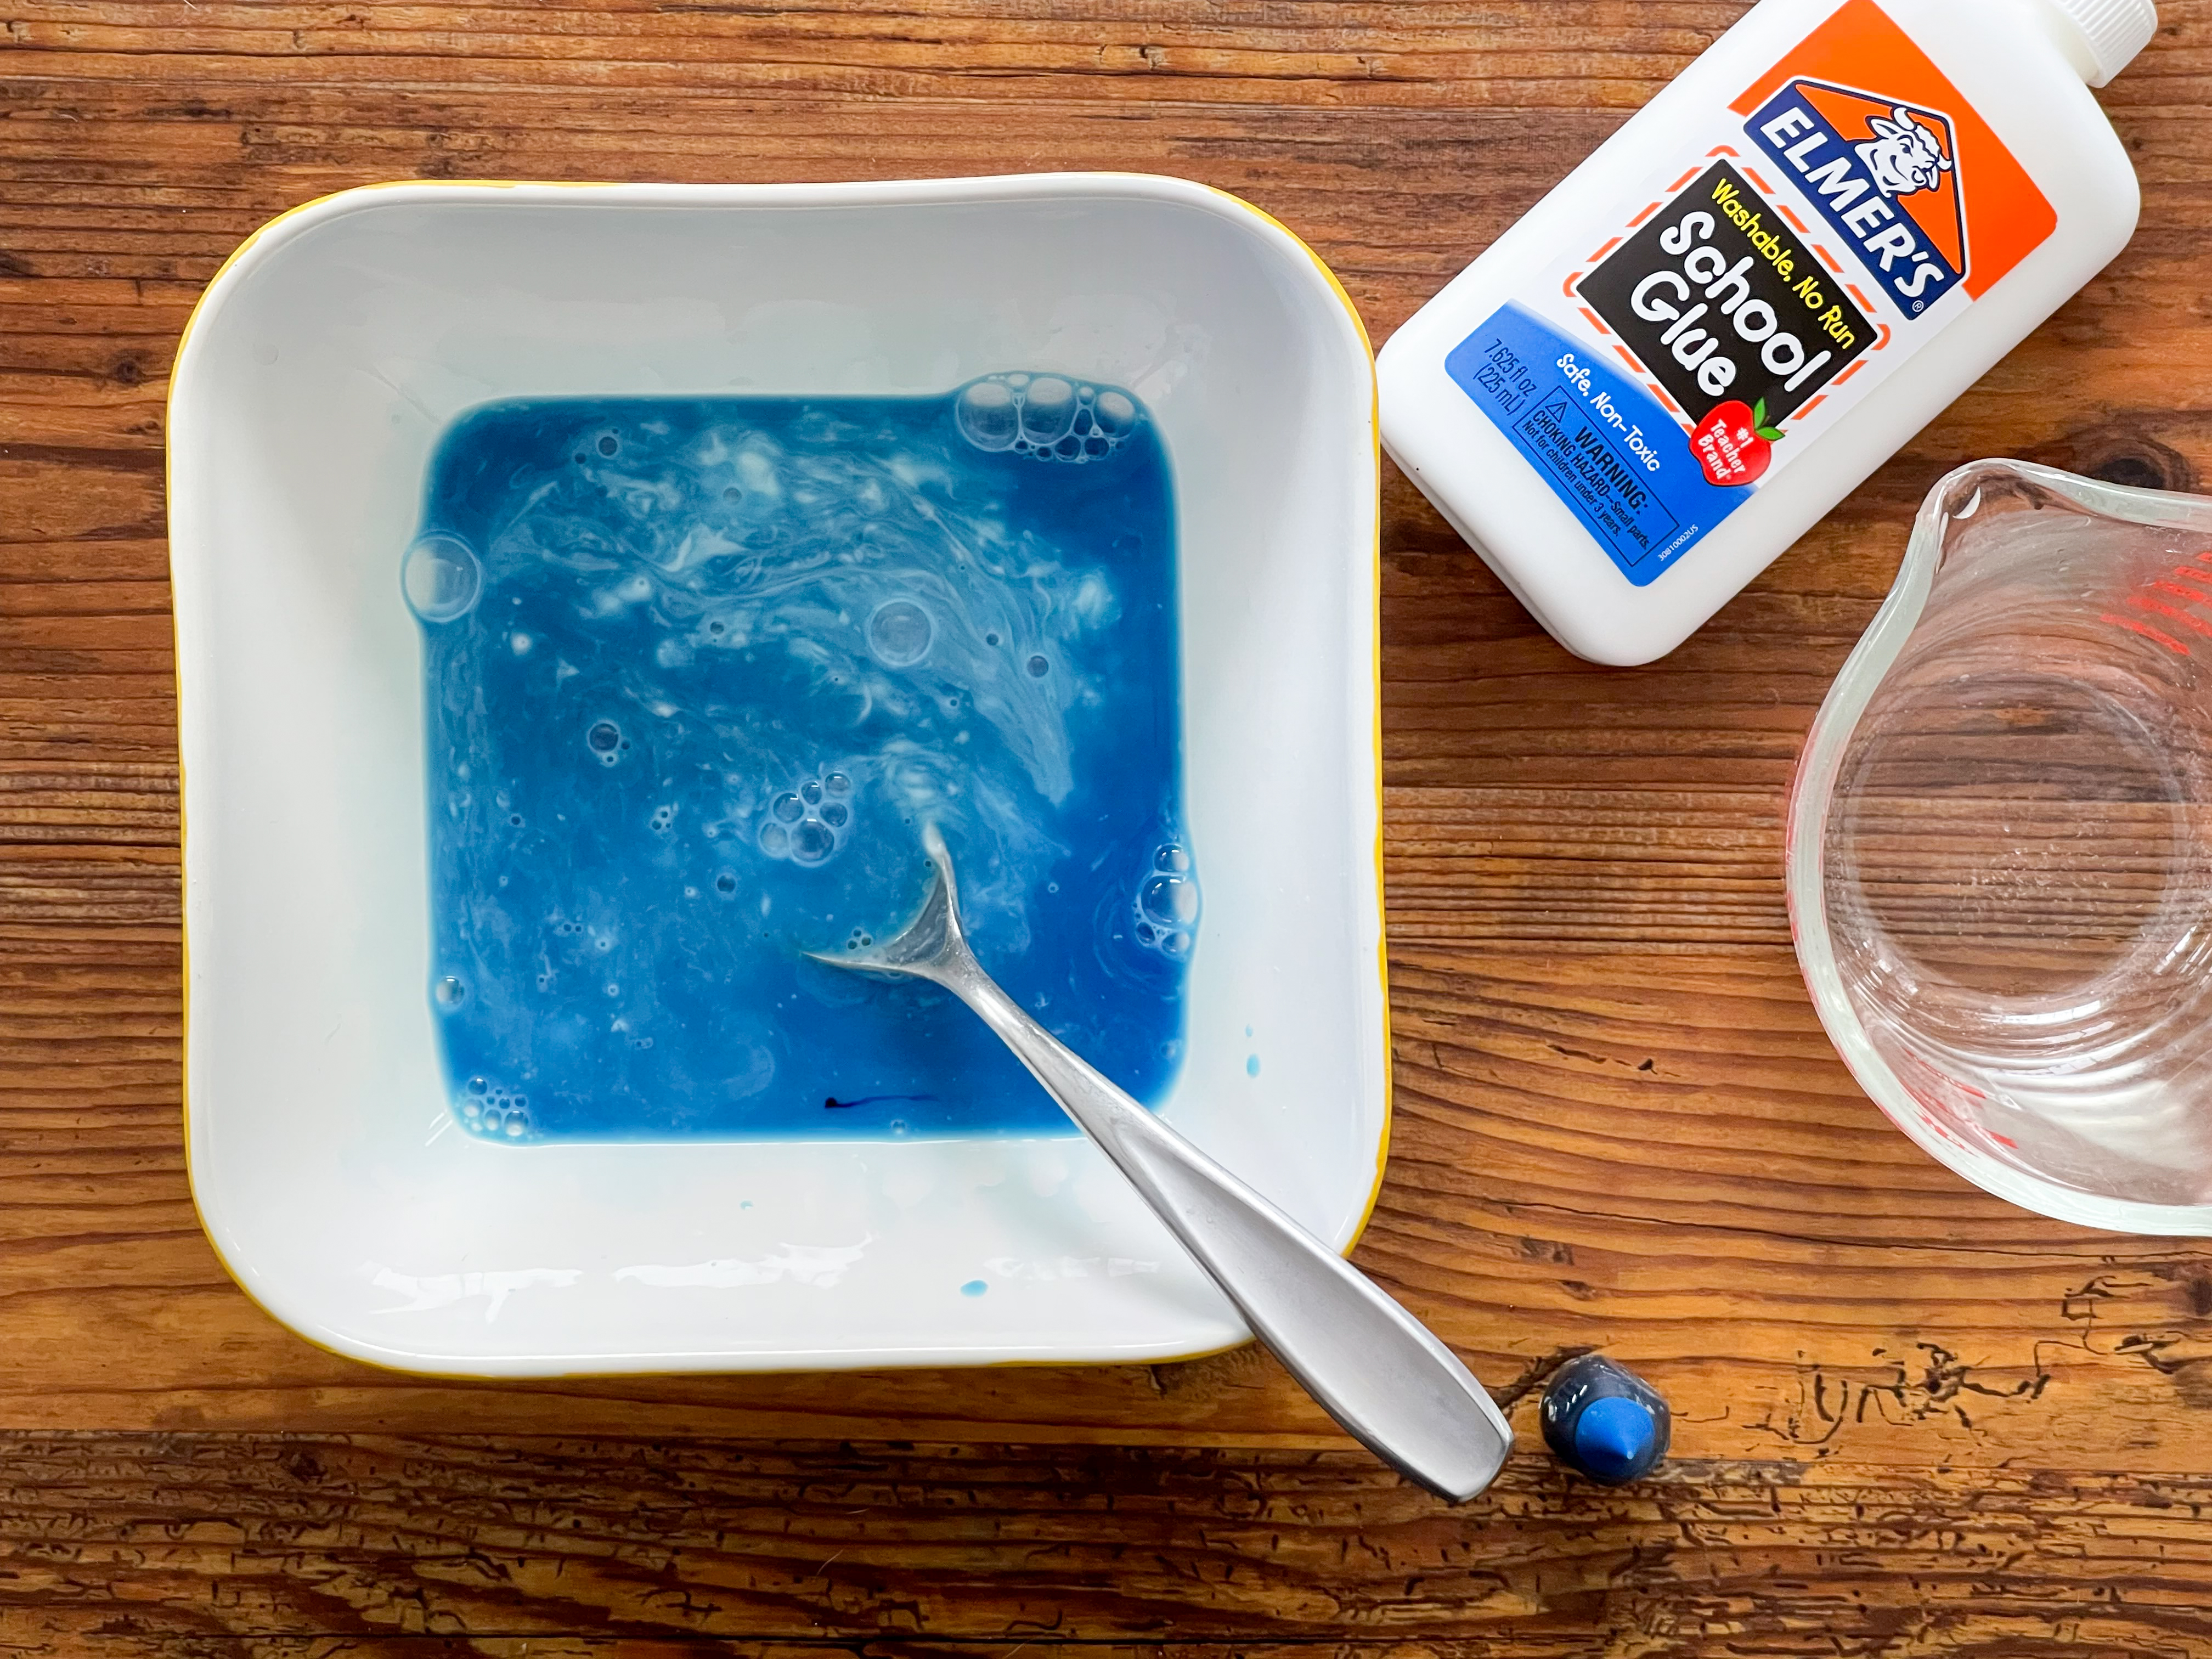 How To Make Your Own Cleaning Slime